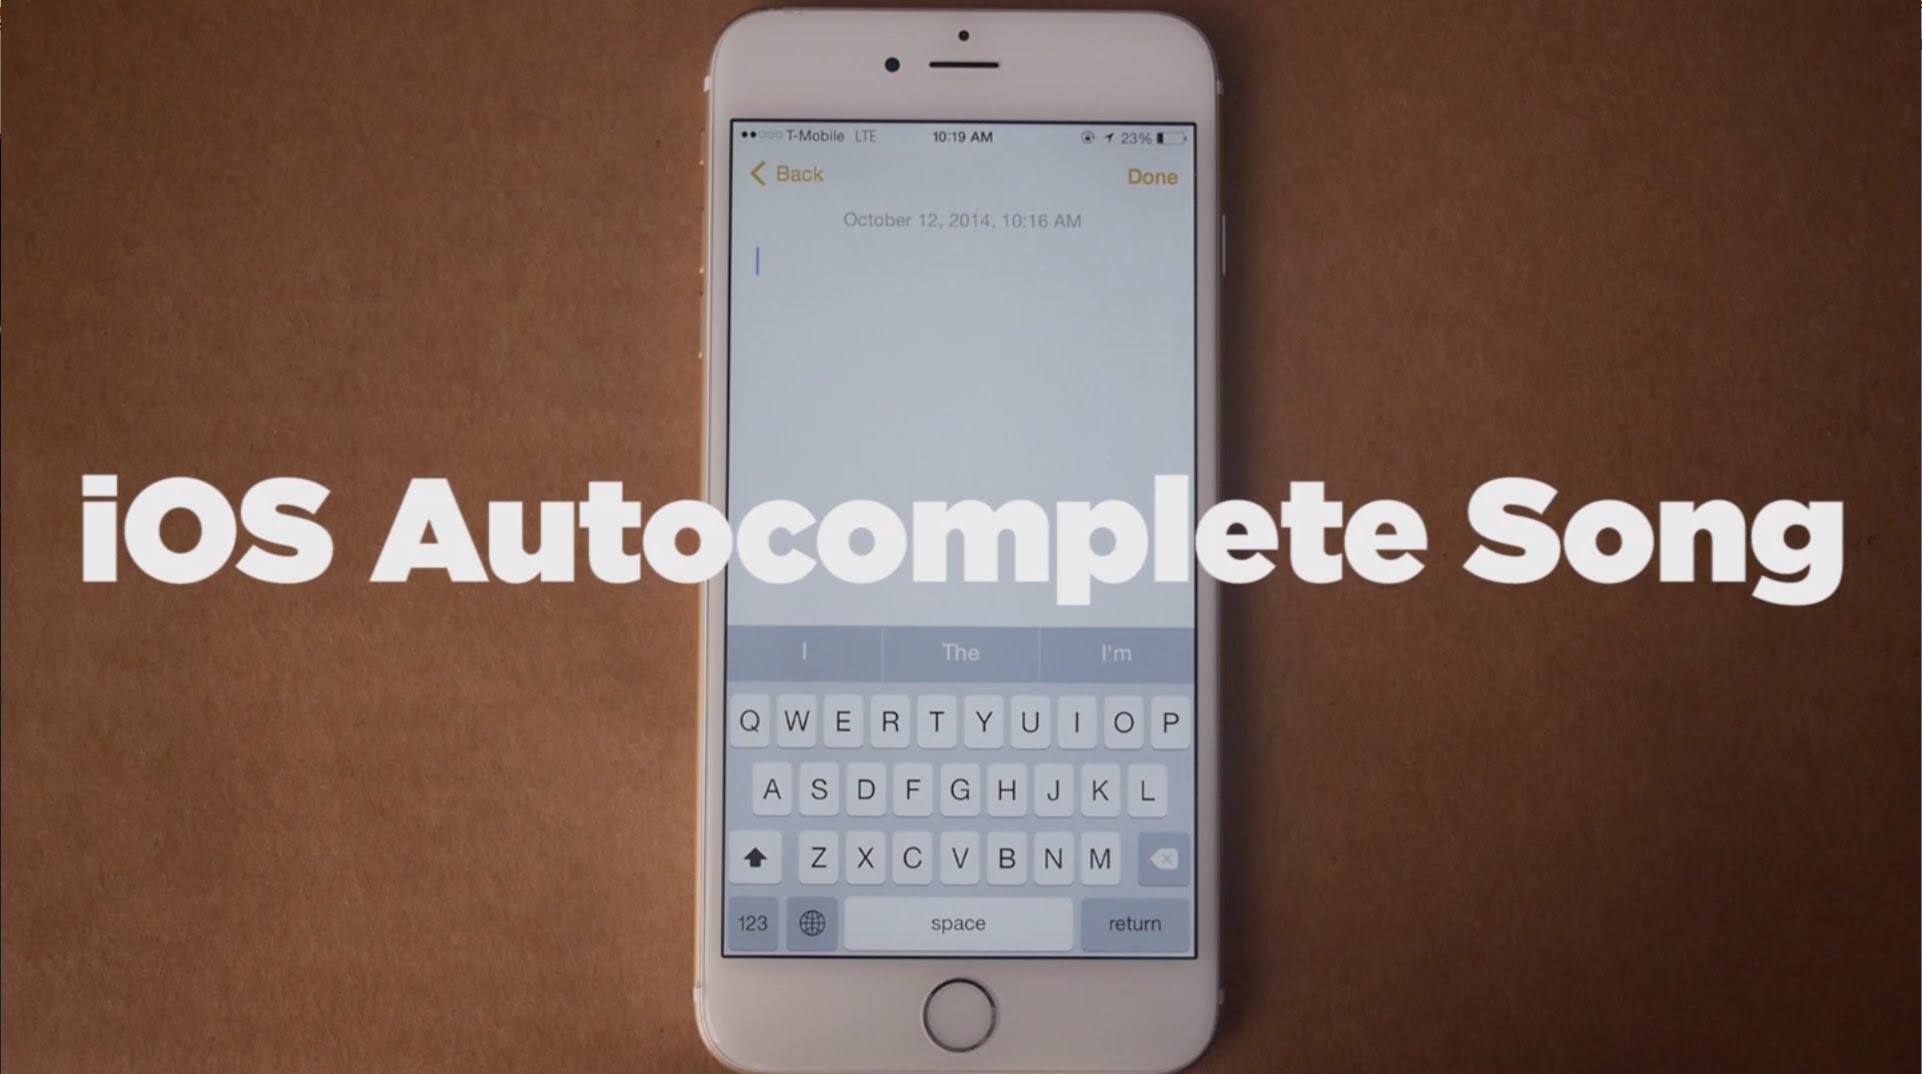 iPhone 6 als Songwriter? Der iOS 8 Autocomplete Song! (Video) 1